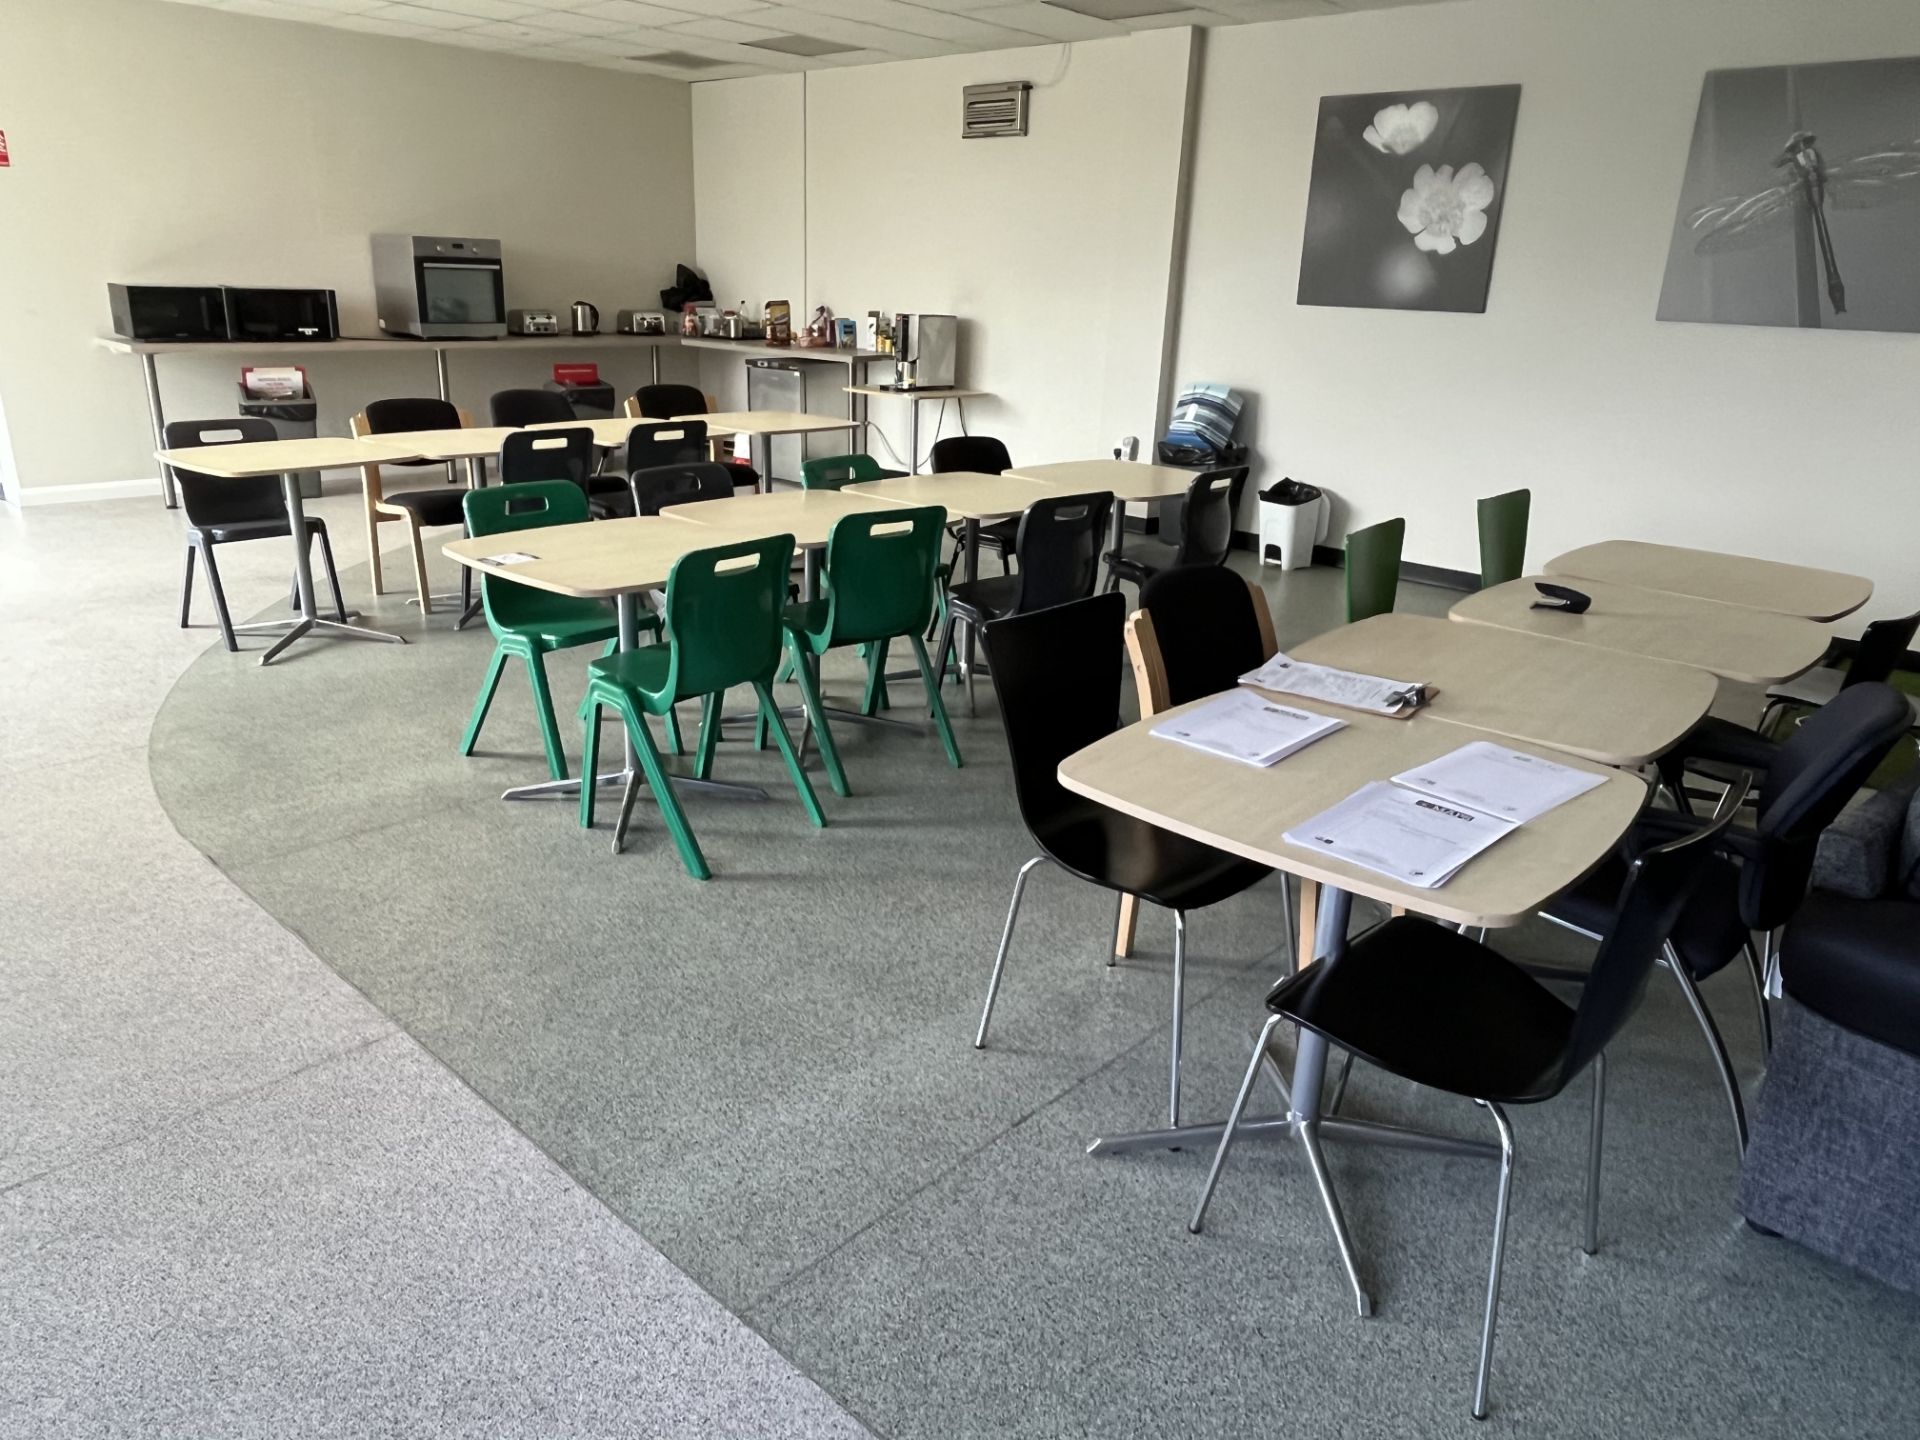 17x (no.) square laminate canteen tables and 29x (no.) plastic stacking chairs